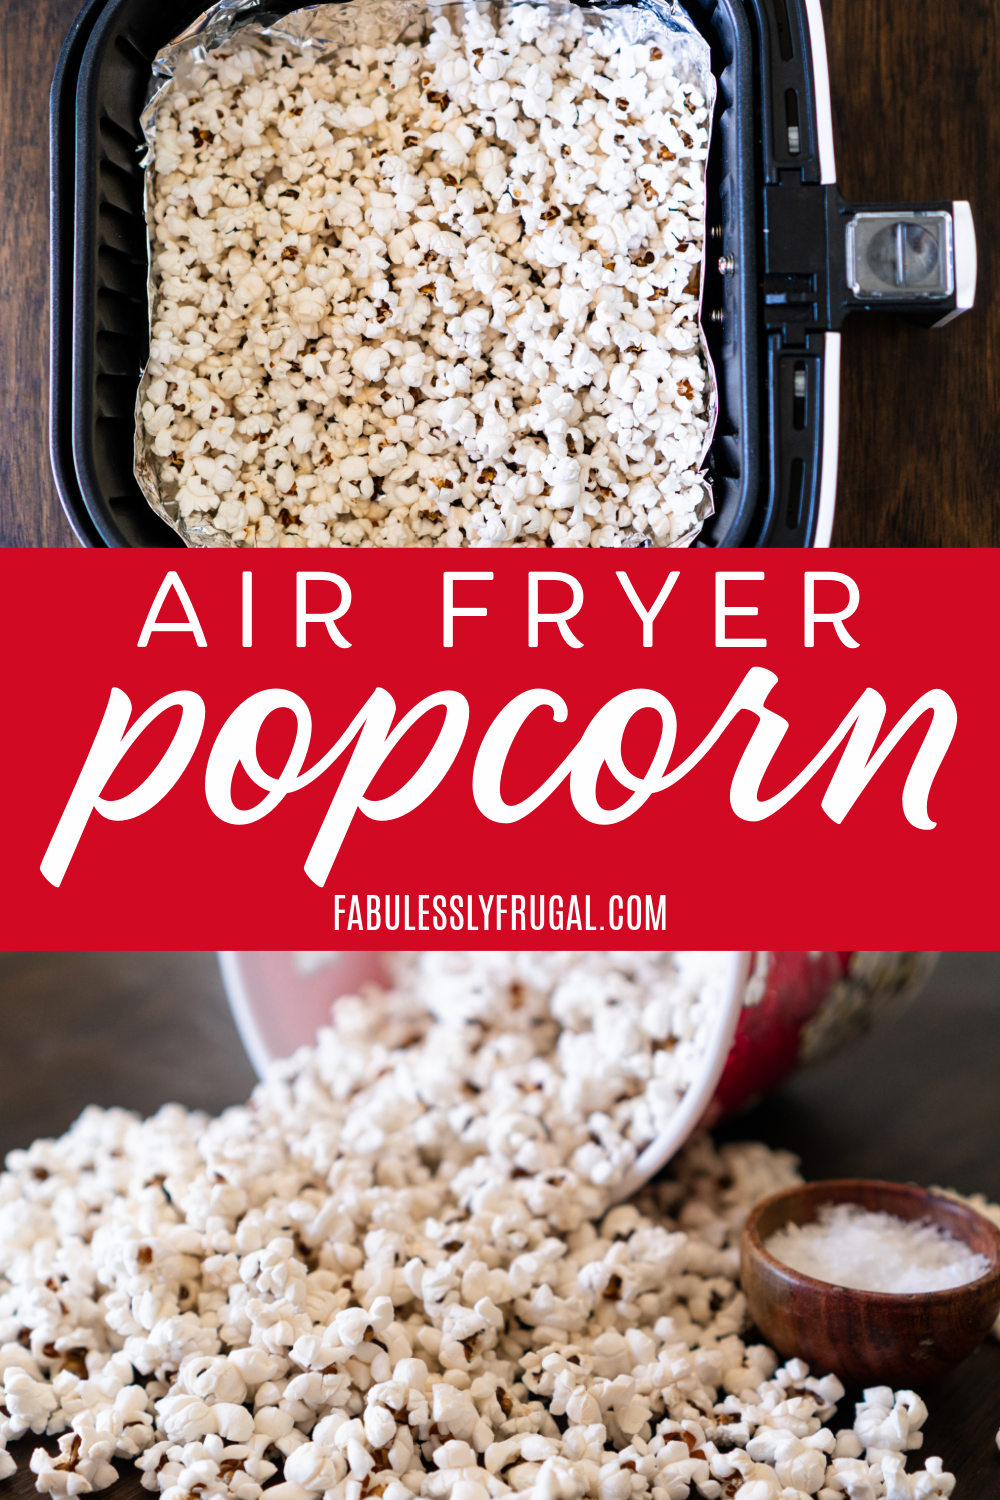 Air fryer popcorn is the best and easiest way to make fresh, airy popcorn. You then can enjoy it with any seasonings you want. 